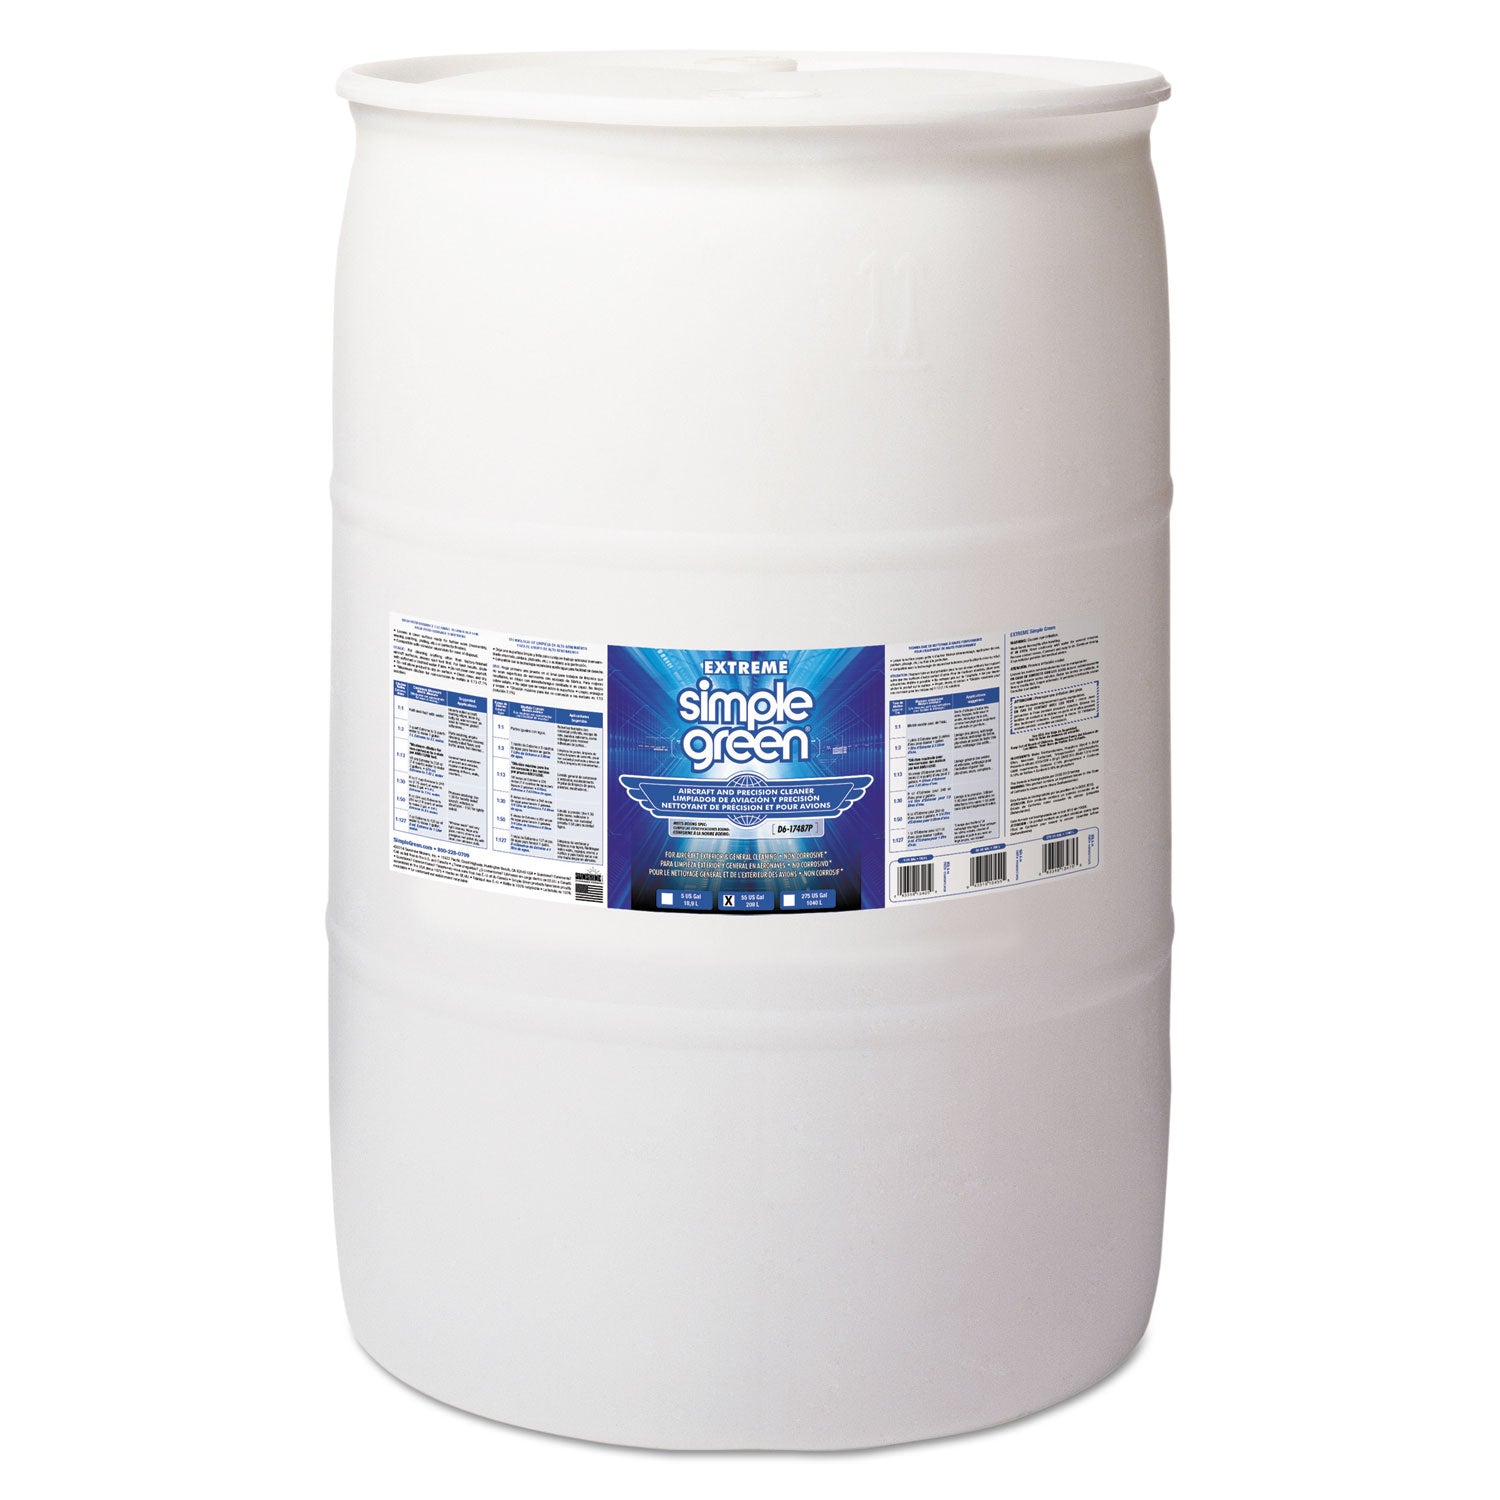 extreme-aircraft-and-precision-equipment-cleaner-neutral-scent-55-gal-drum_smp13455 - 1